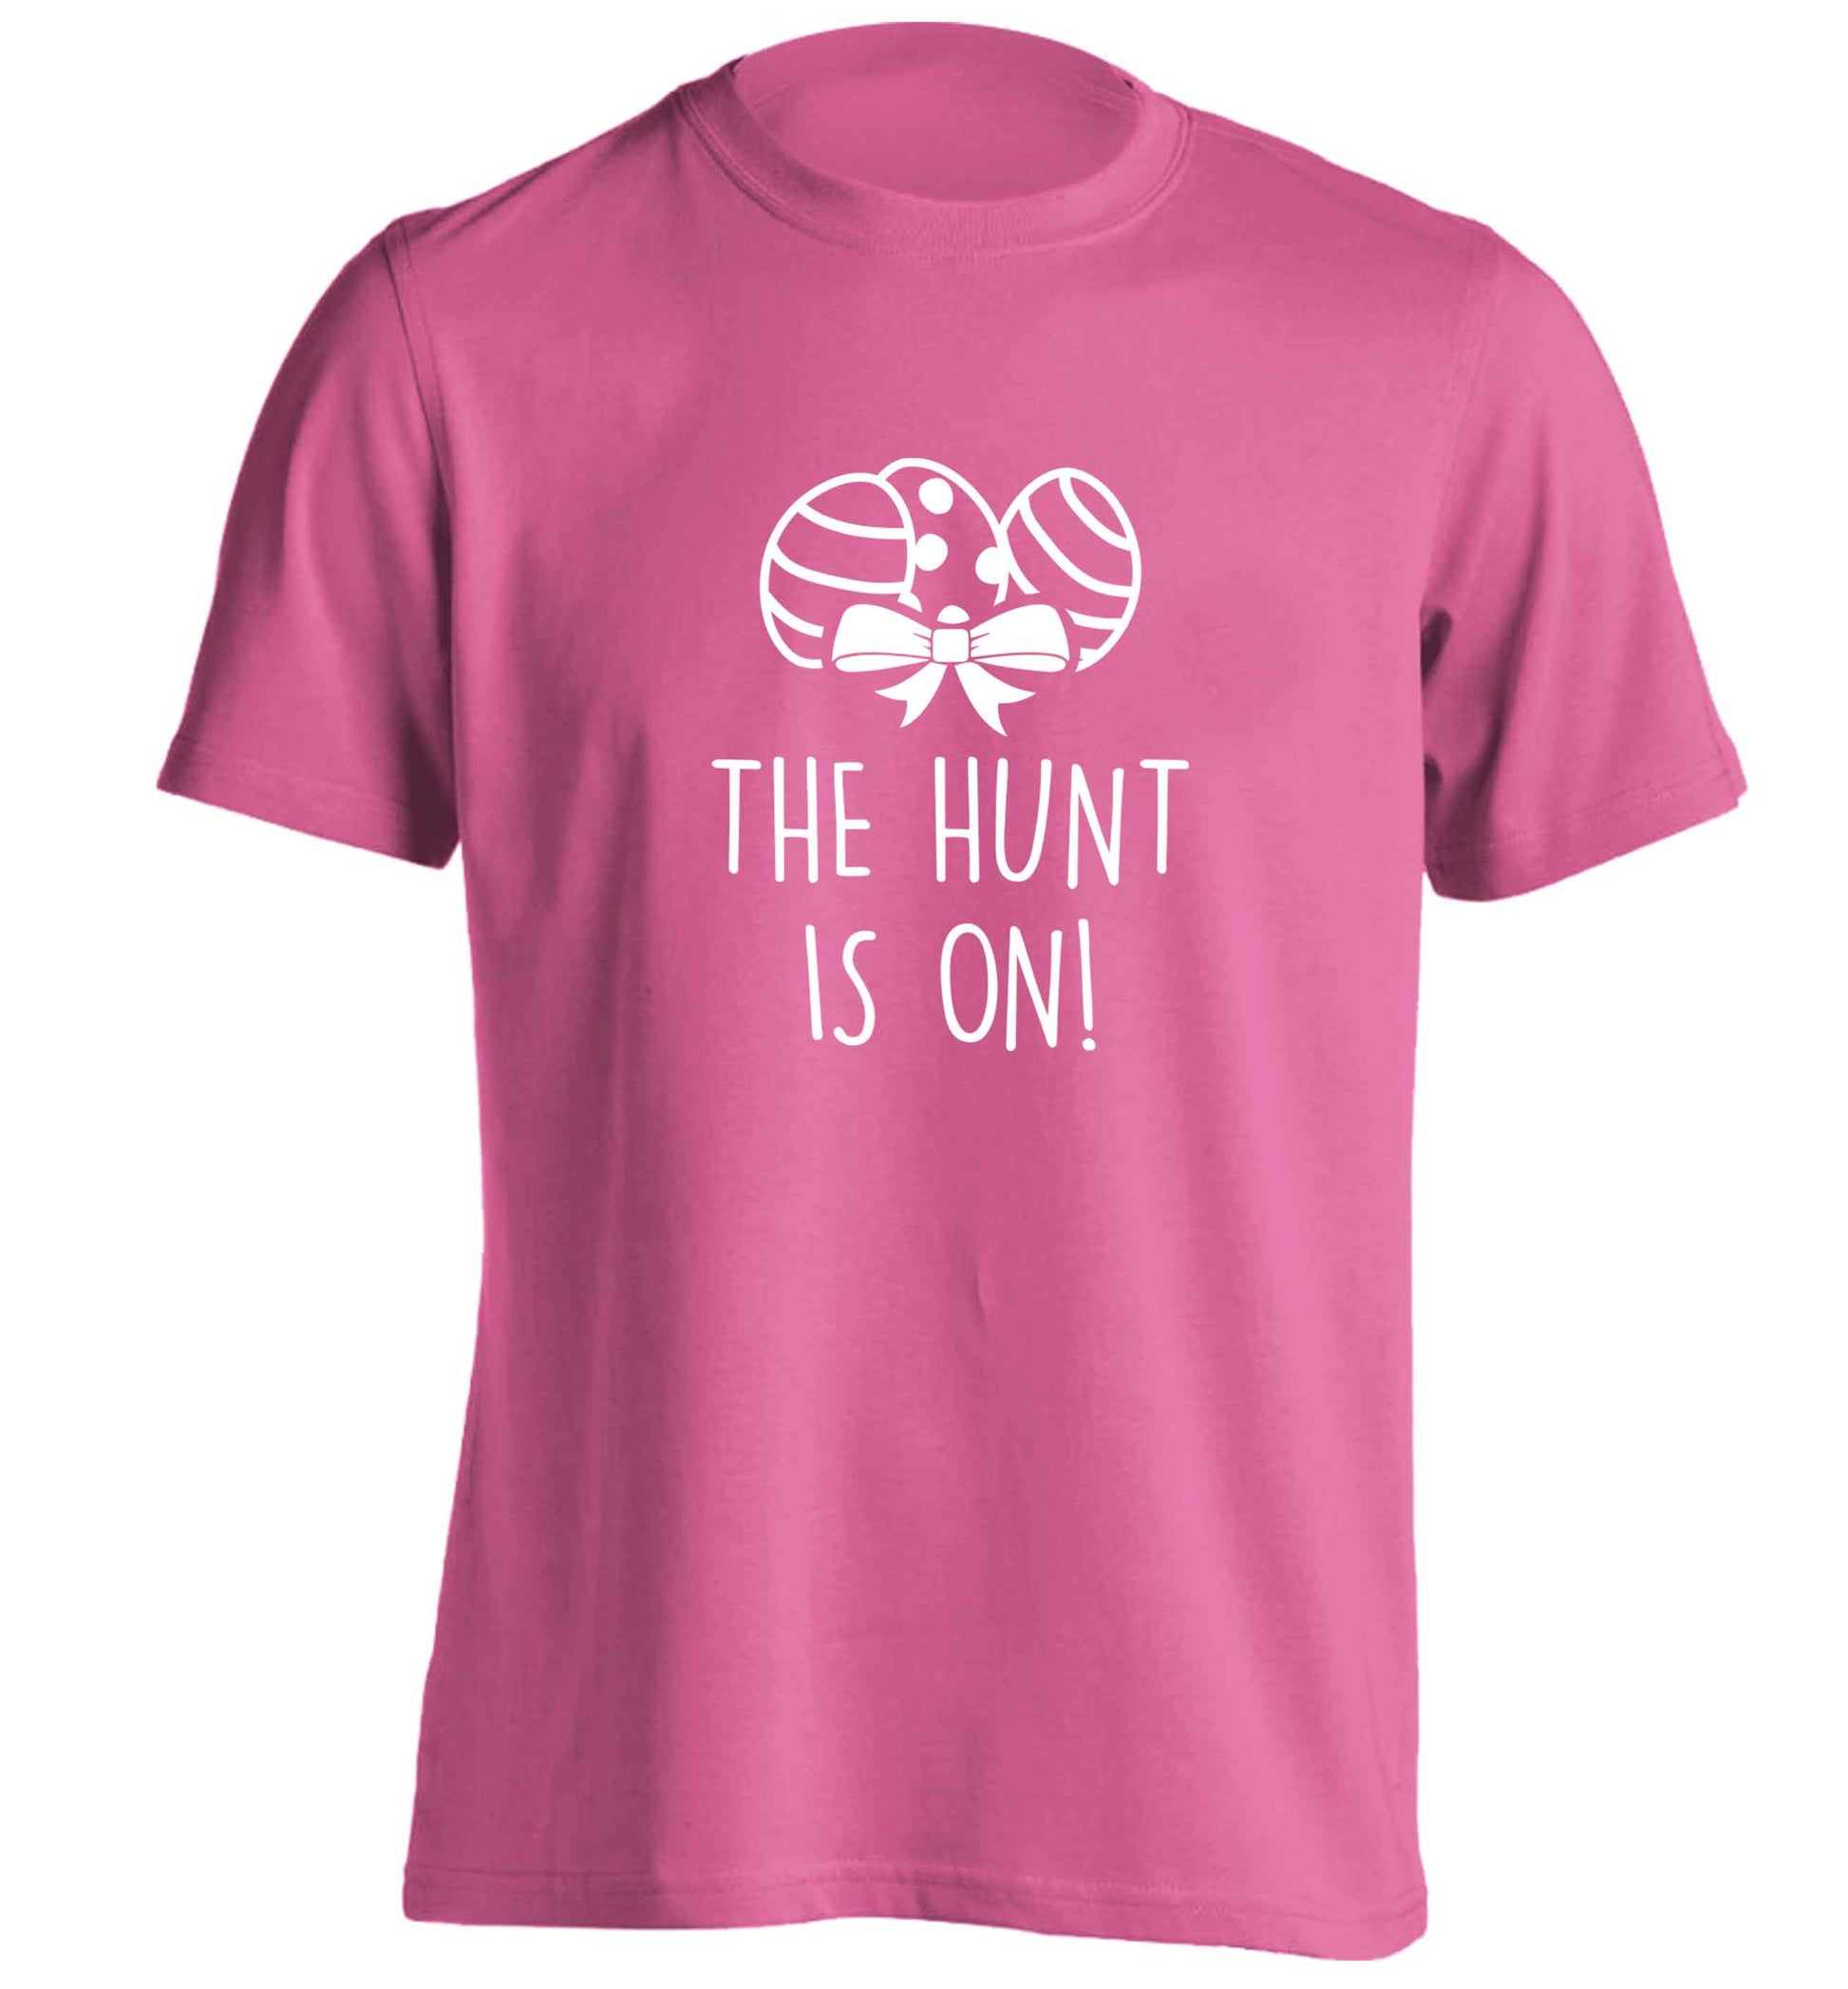 The hunt is on adults unisex pink Tshirt 2XL